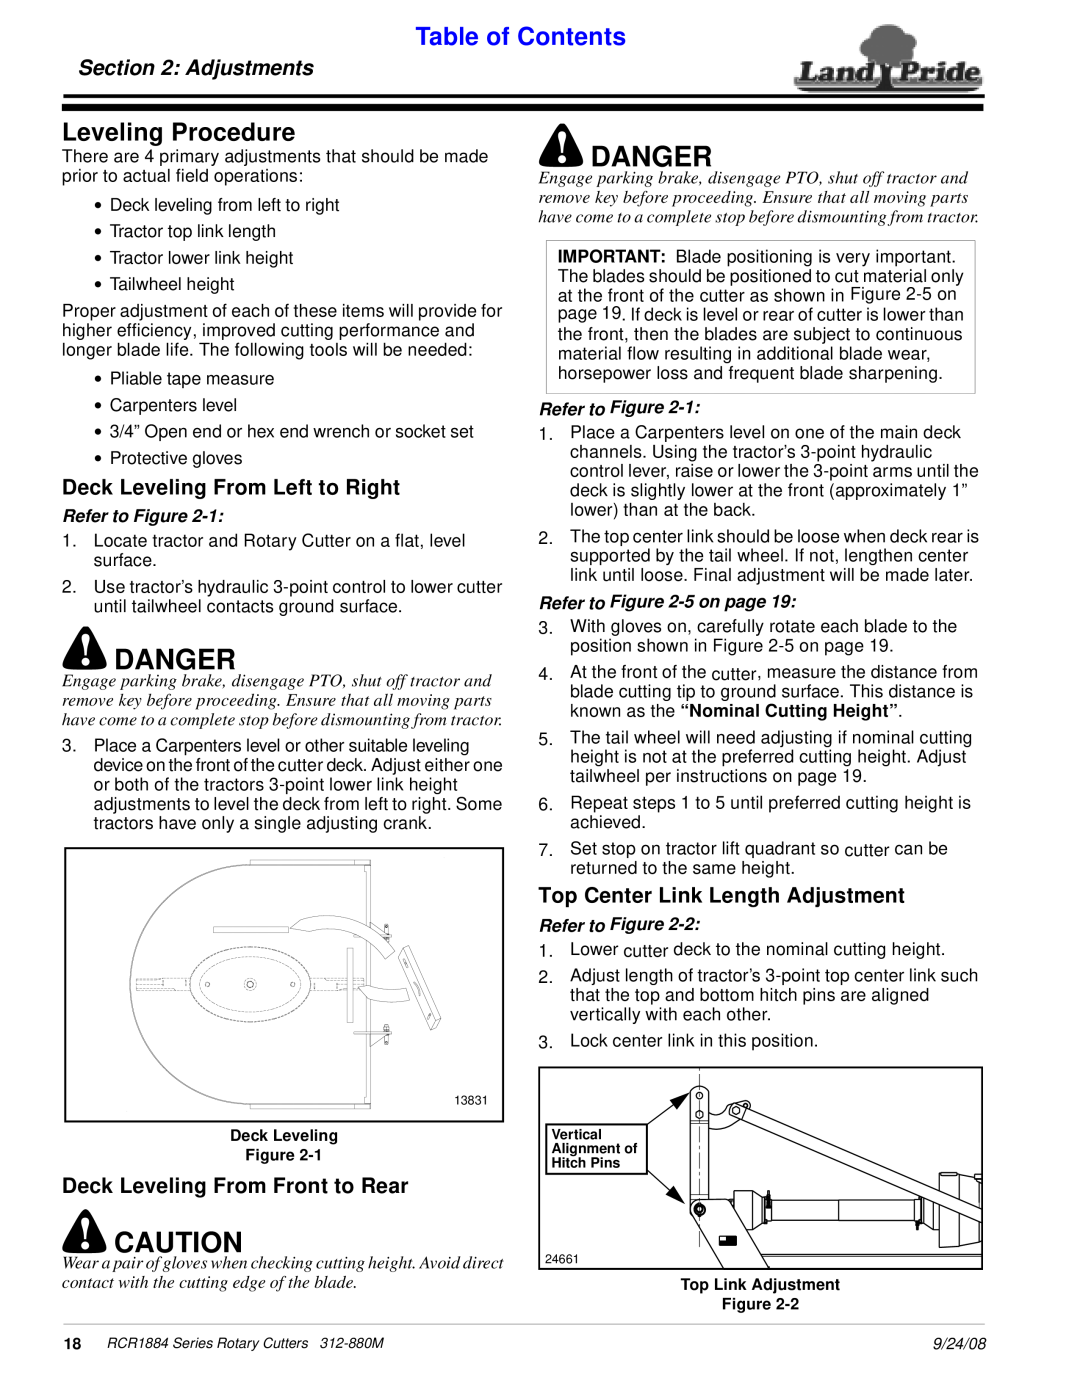 Land Pride RCR1884 manual Leveling Procedure, Adjustments, Danger, Table of Contents, Refer to Figure, Refer to -5on page 